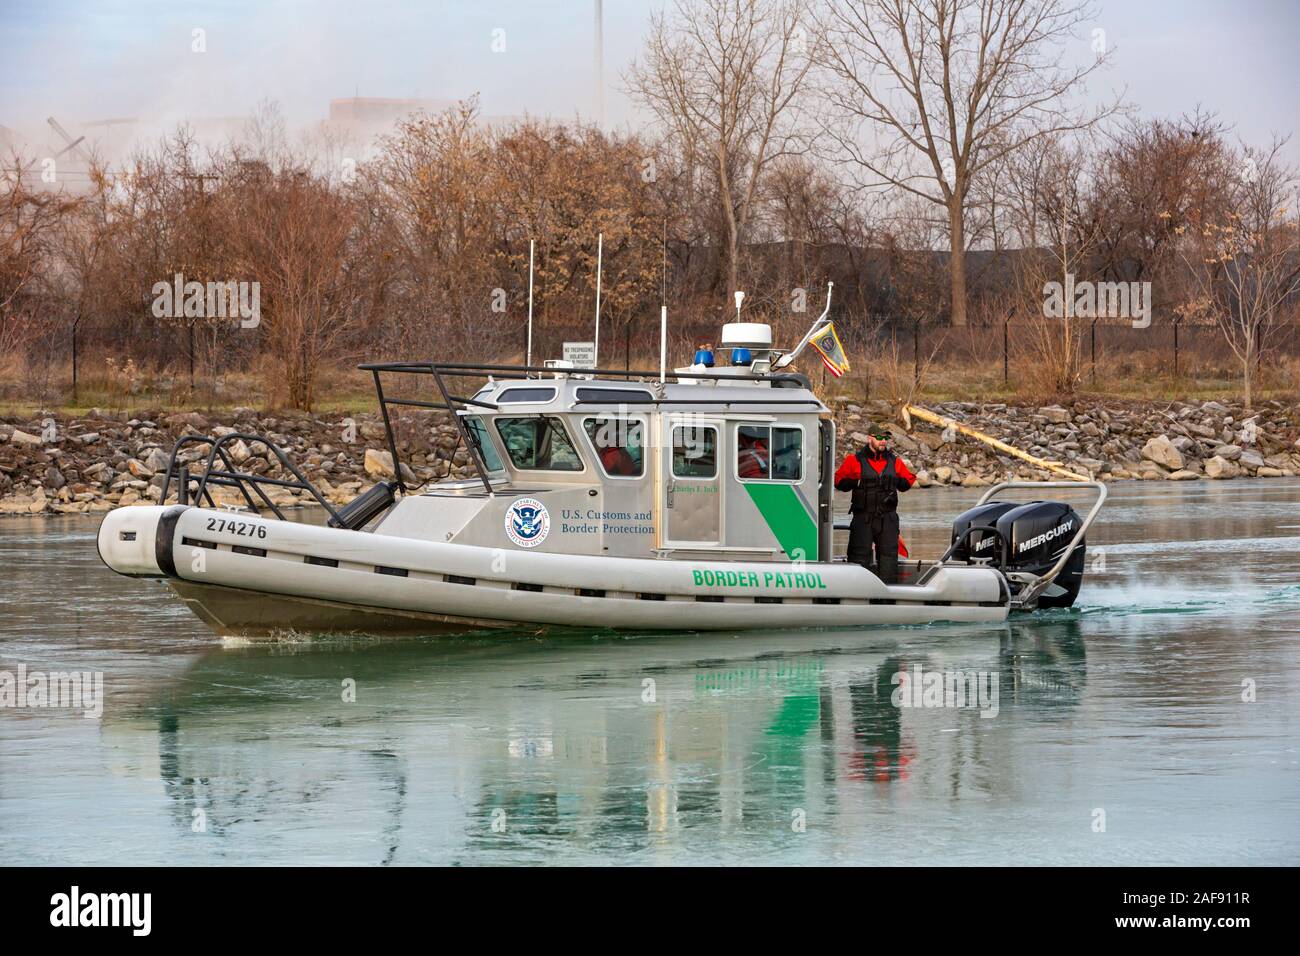 Detroit, Michigan - A U.S. Border Patrol boat cuts through ice on Conners Creek on its way to patrol the Detroit River between the United States and C Stock Photo